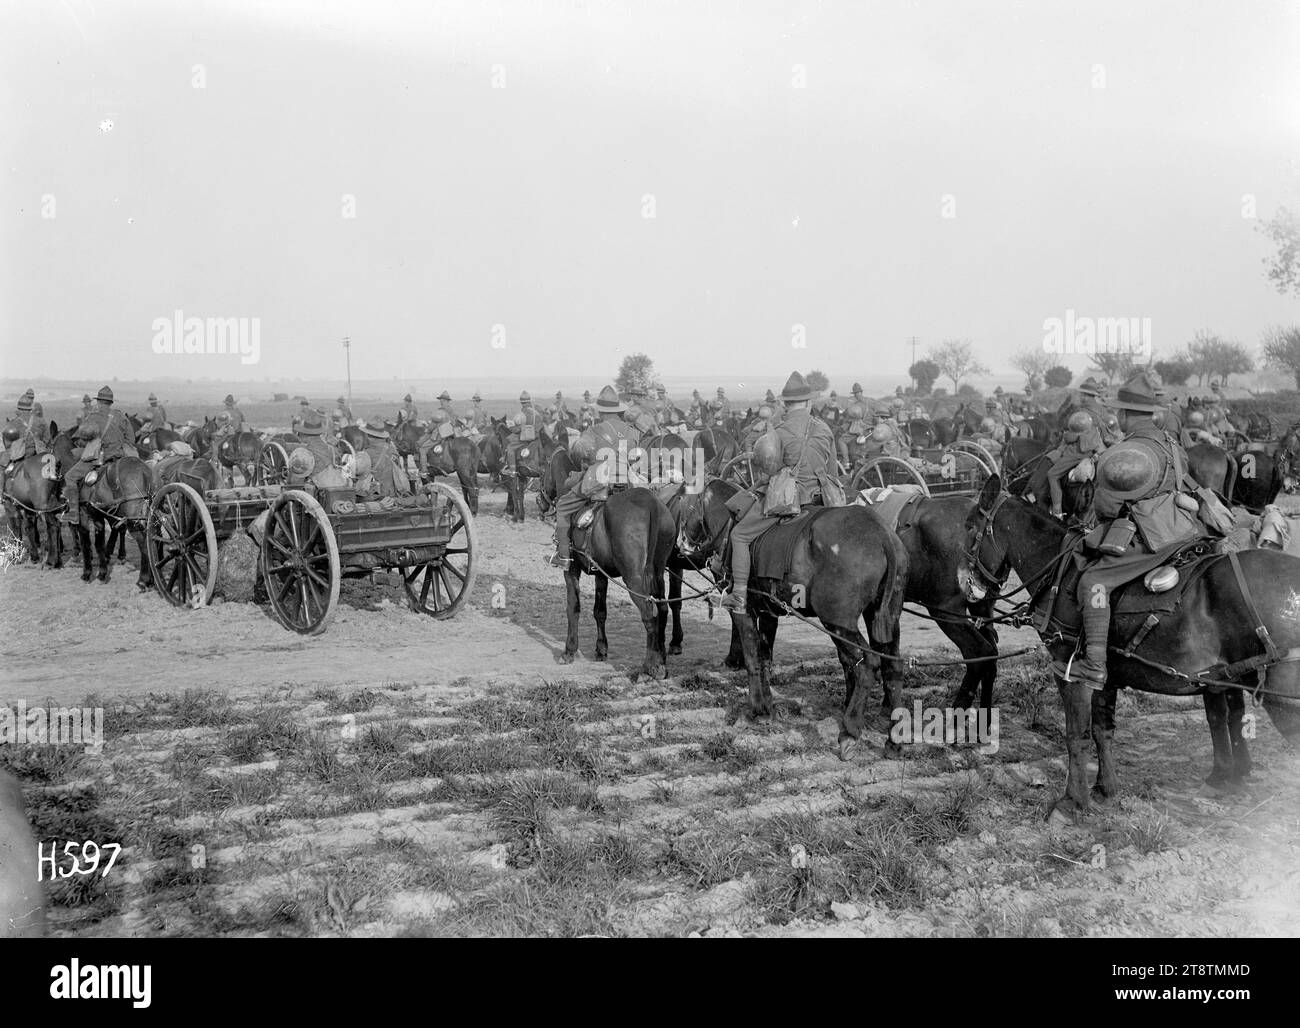 Artillery transport awaiting inspection, Bus-les-Artois, The transport of a New Zealand Field Artillery Battery lined up awaiting inspection by the General Officer Commanding during World War I. View from behind the assembled battery. Photograph taken 21 May 1918 Stock Photo